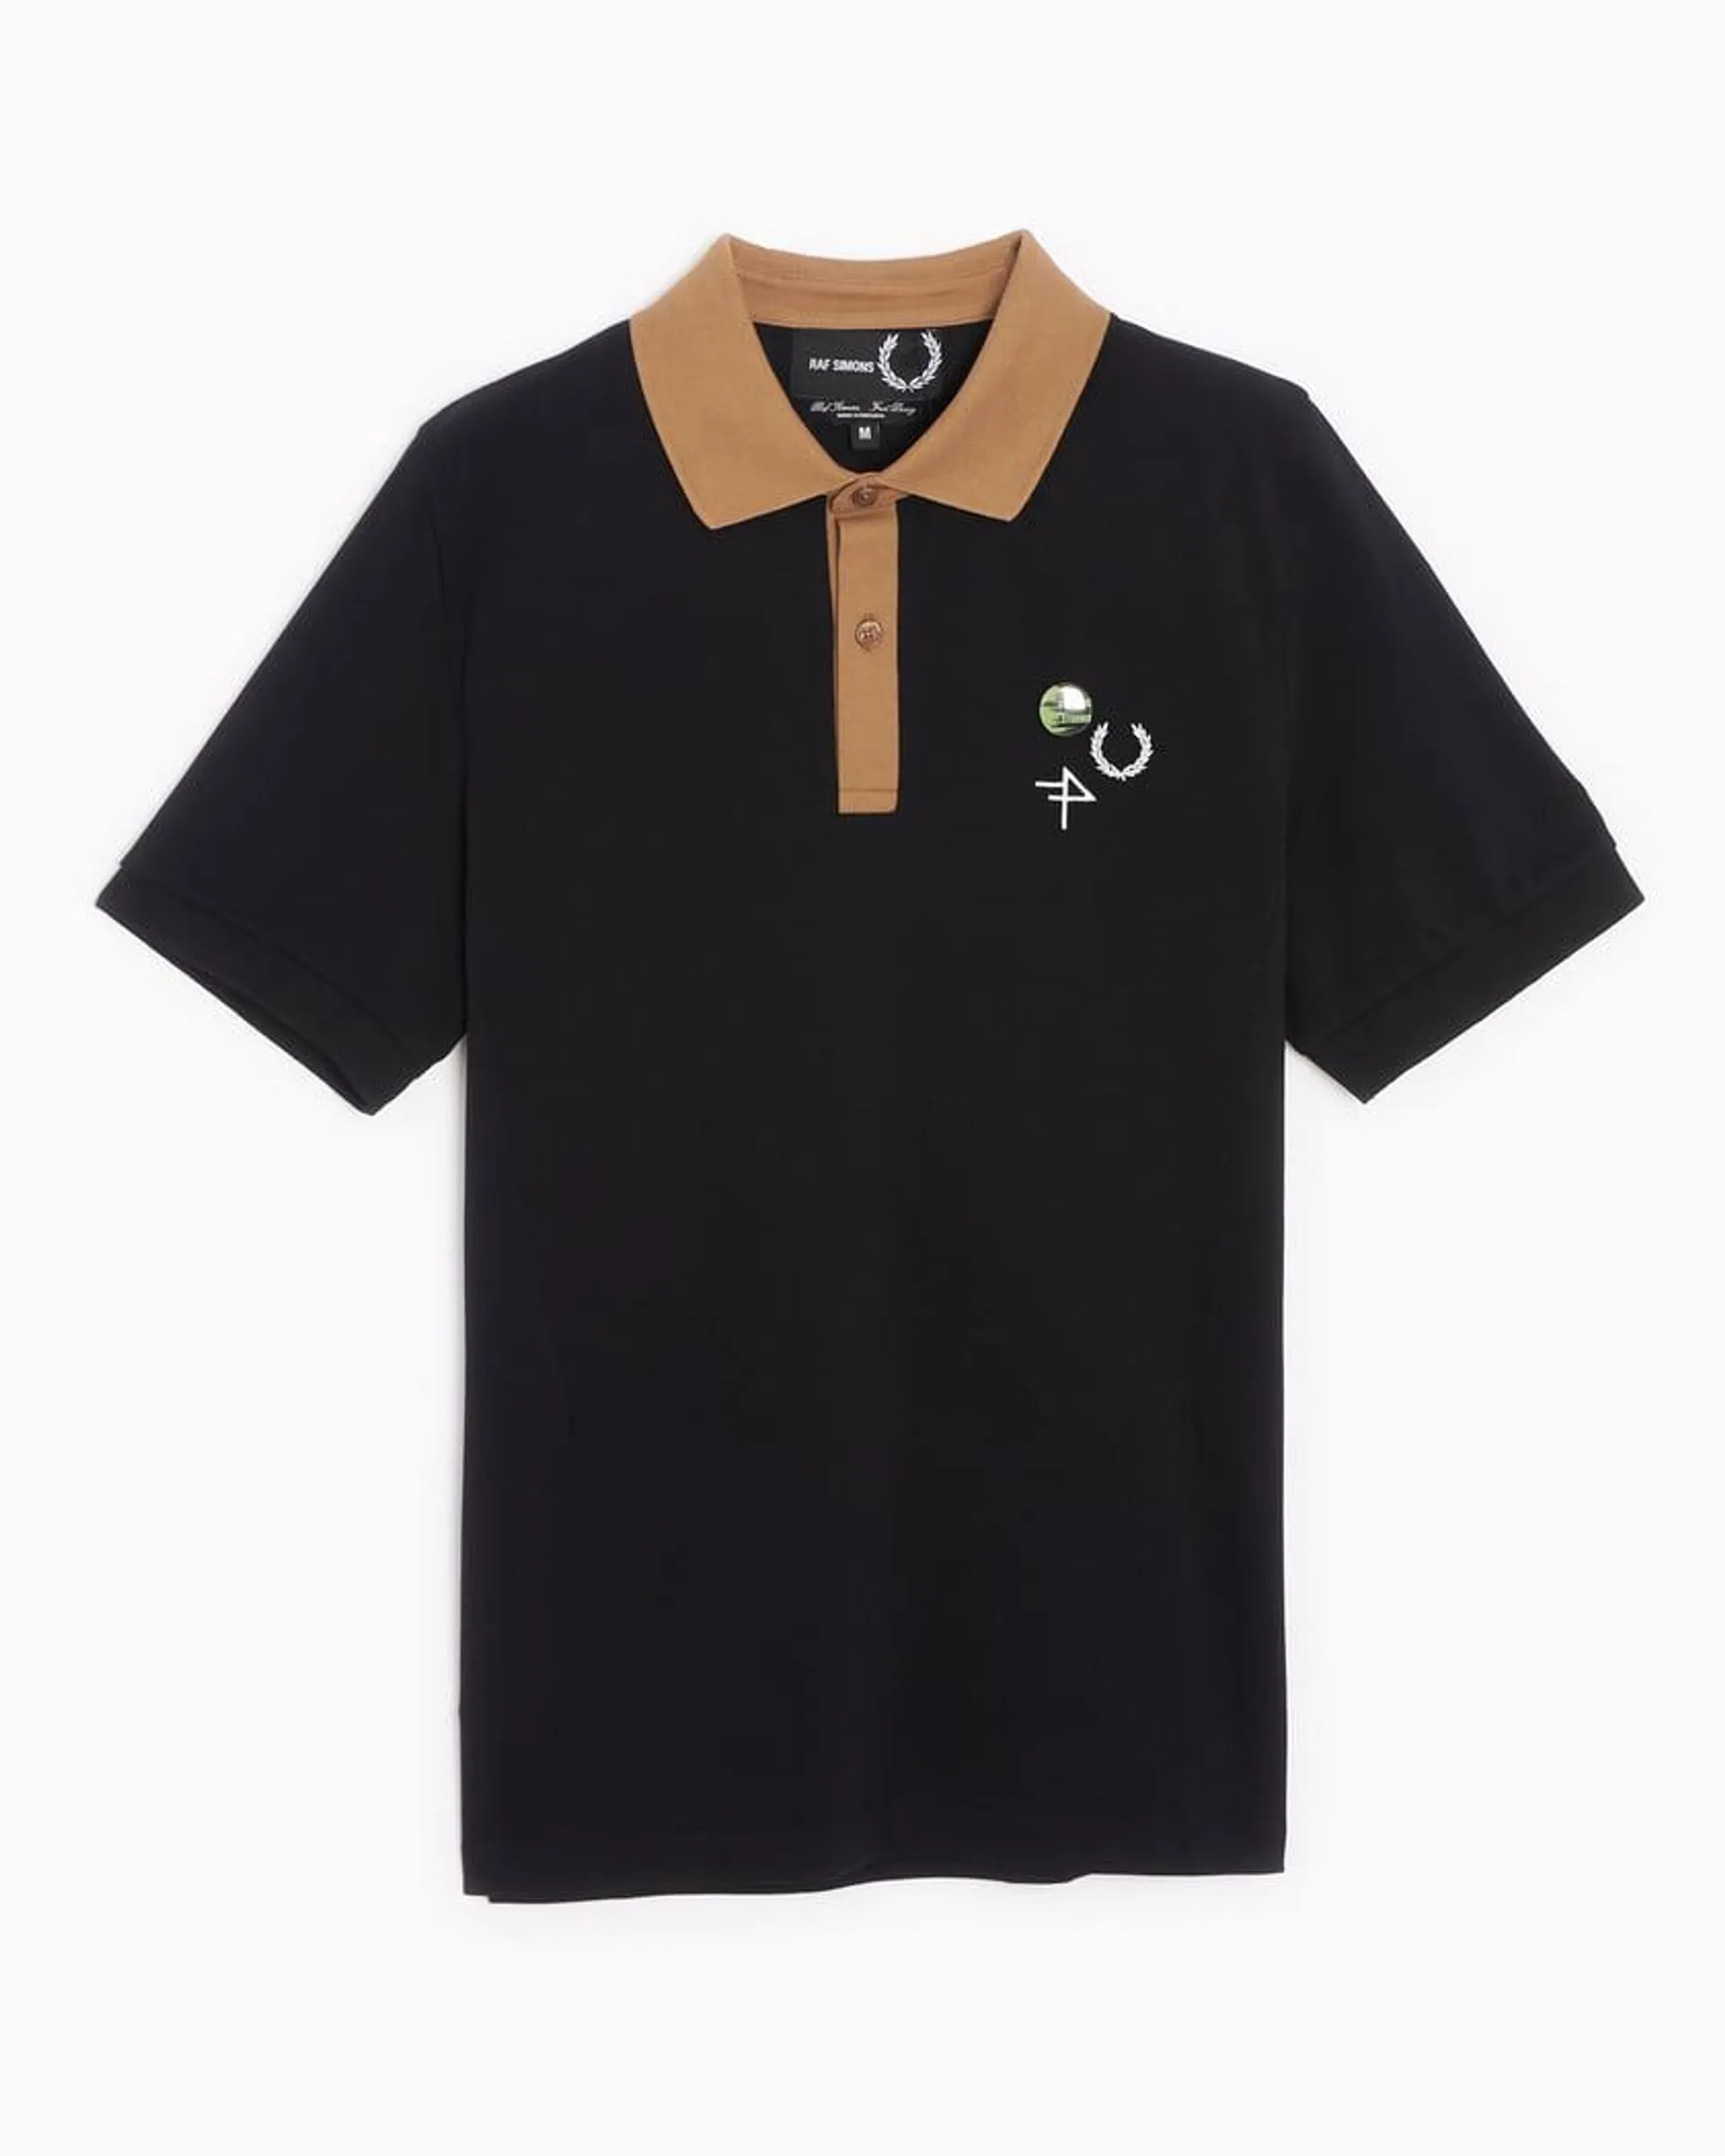 Fred Perry x Raf Simons Contrast Collar Men's Short Sleeve Polo